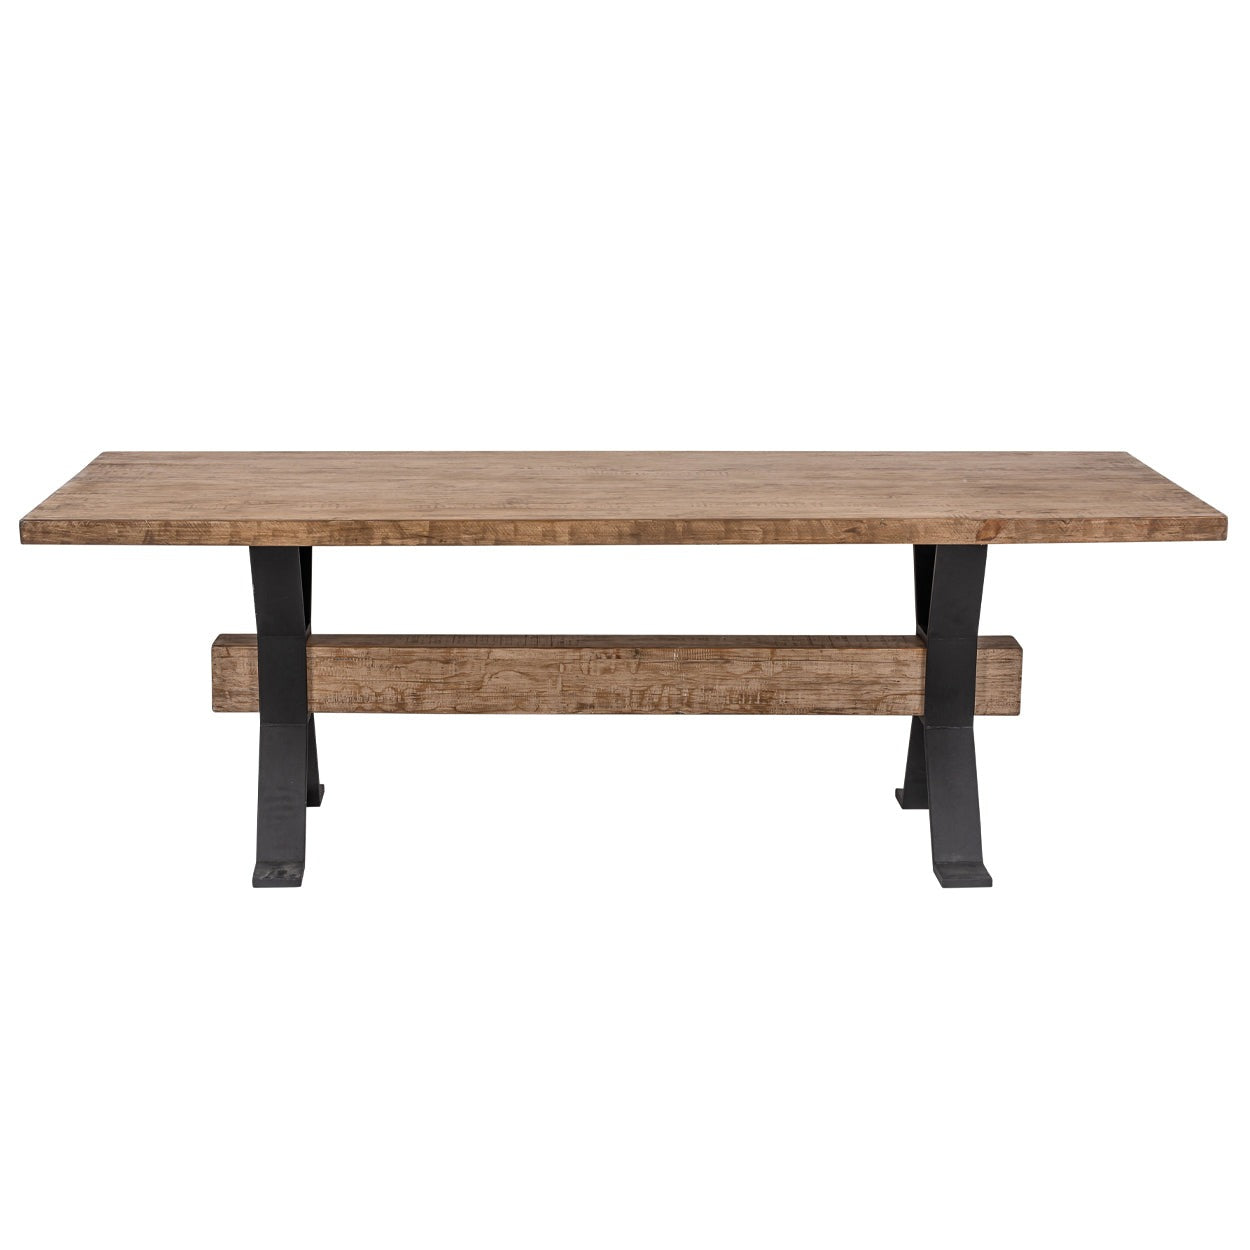 Kingswood Dining Table - Large